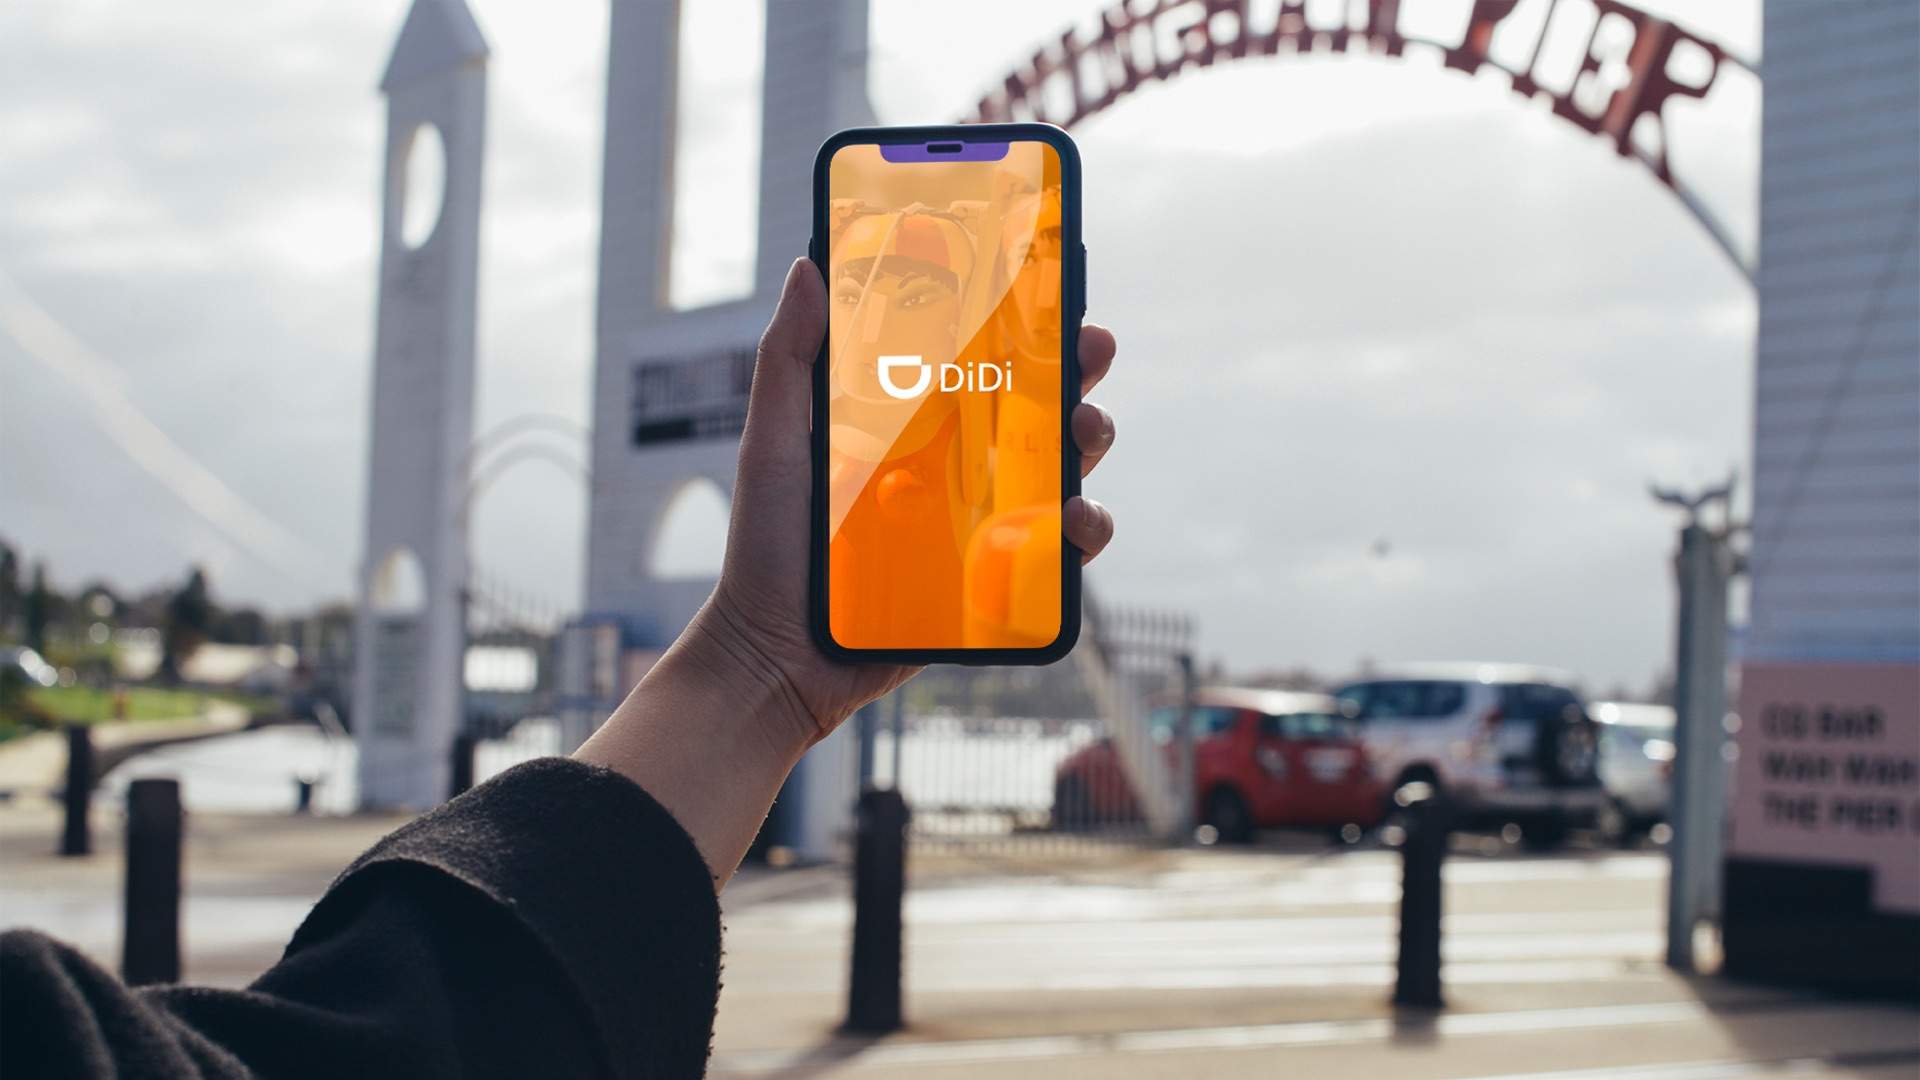 Chinese Ridesharing Service DiDi Express Has Launched in Melbourne with a Month of Half-Price Rides